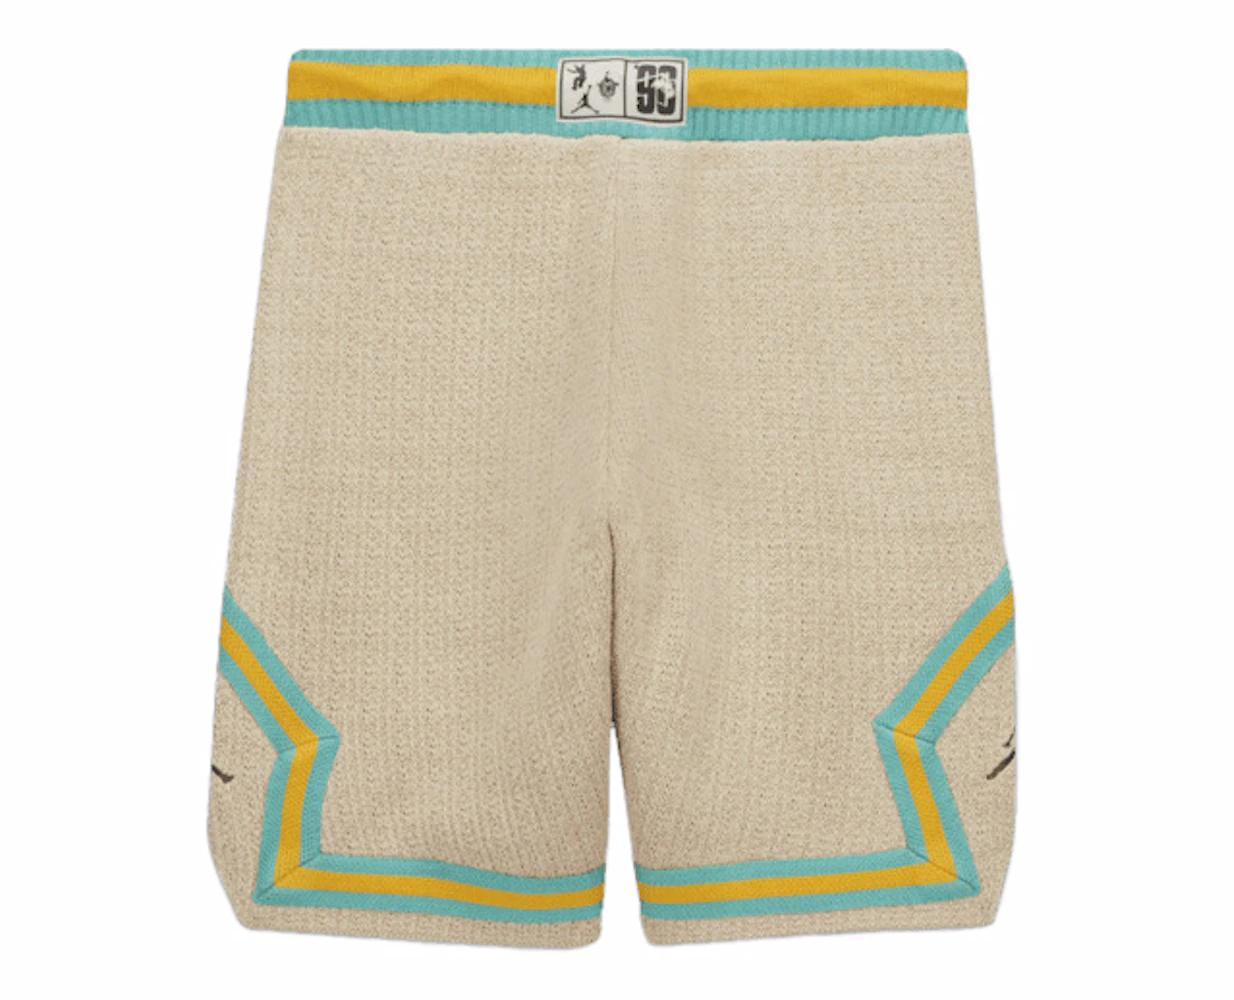 Jordan x UNION x - Baroque Supply - Brown/Washed US Bephies FW23 Beauty Diamond Shorts Men\'s Teal